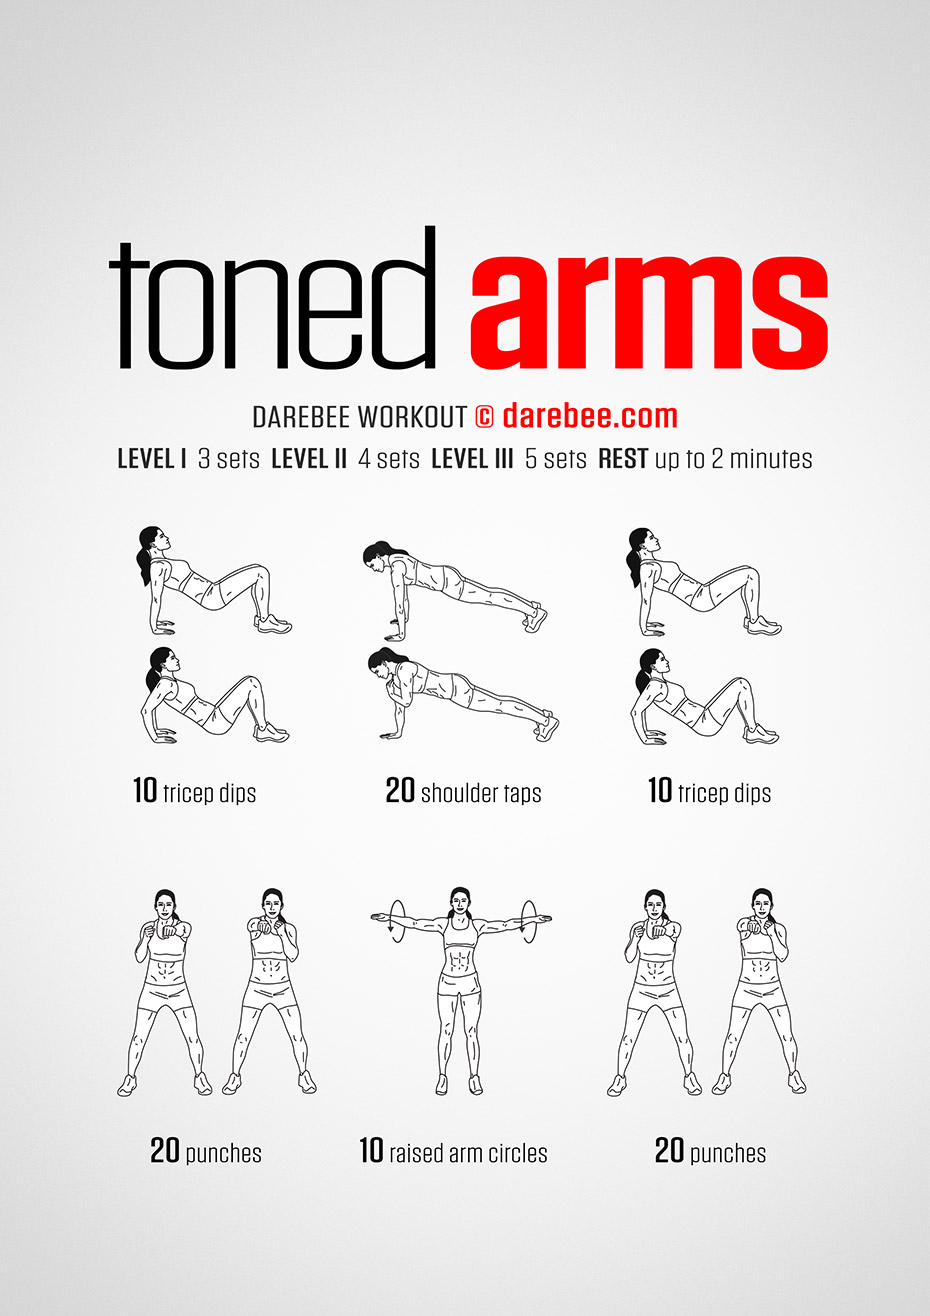 Arm Shred Workout